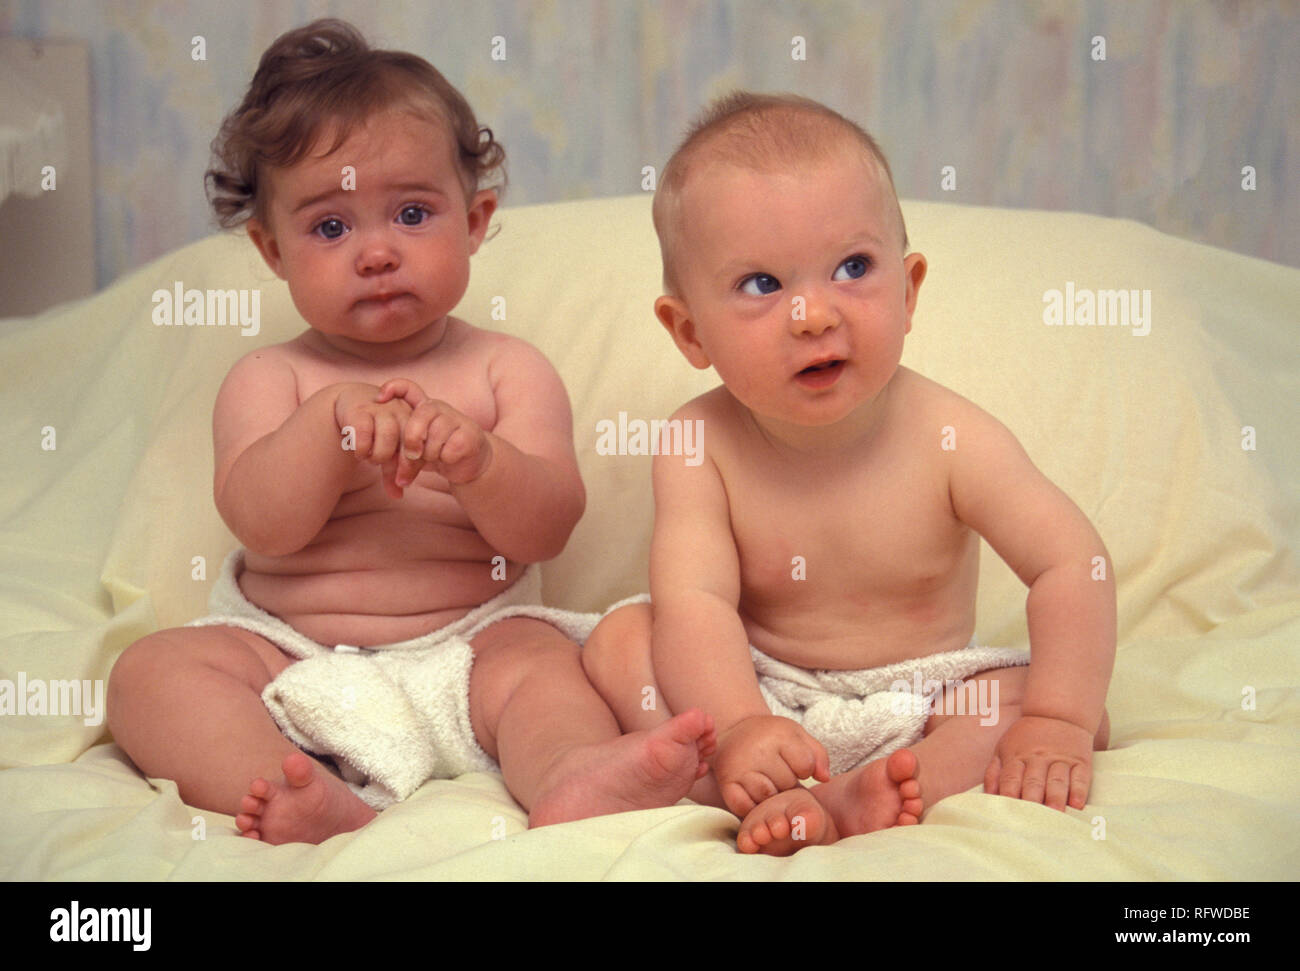 two babies fighting Stock Photo